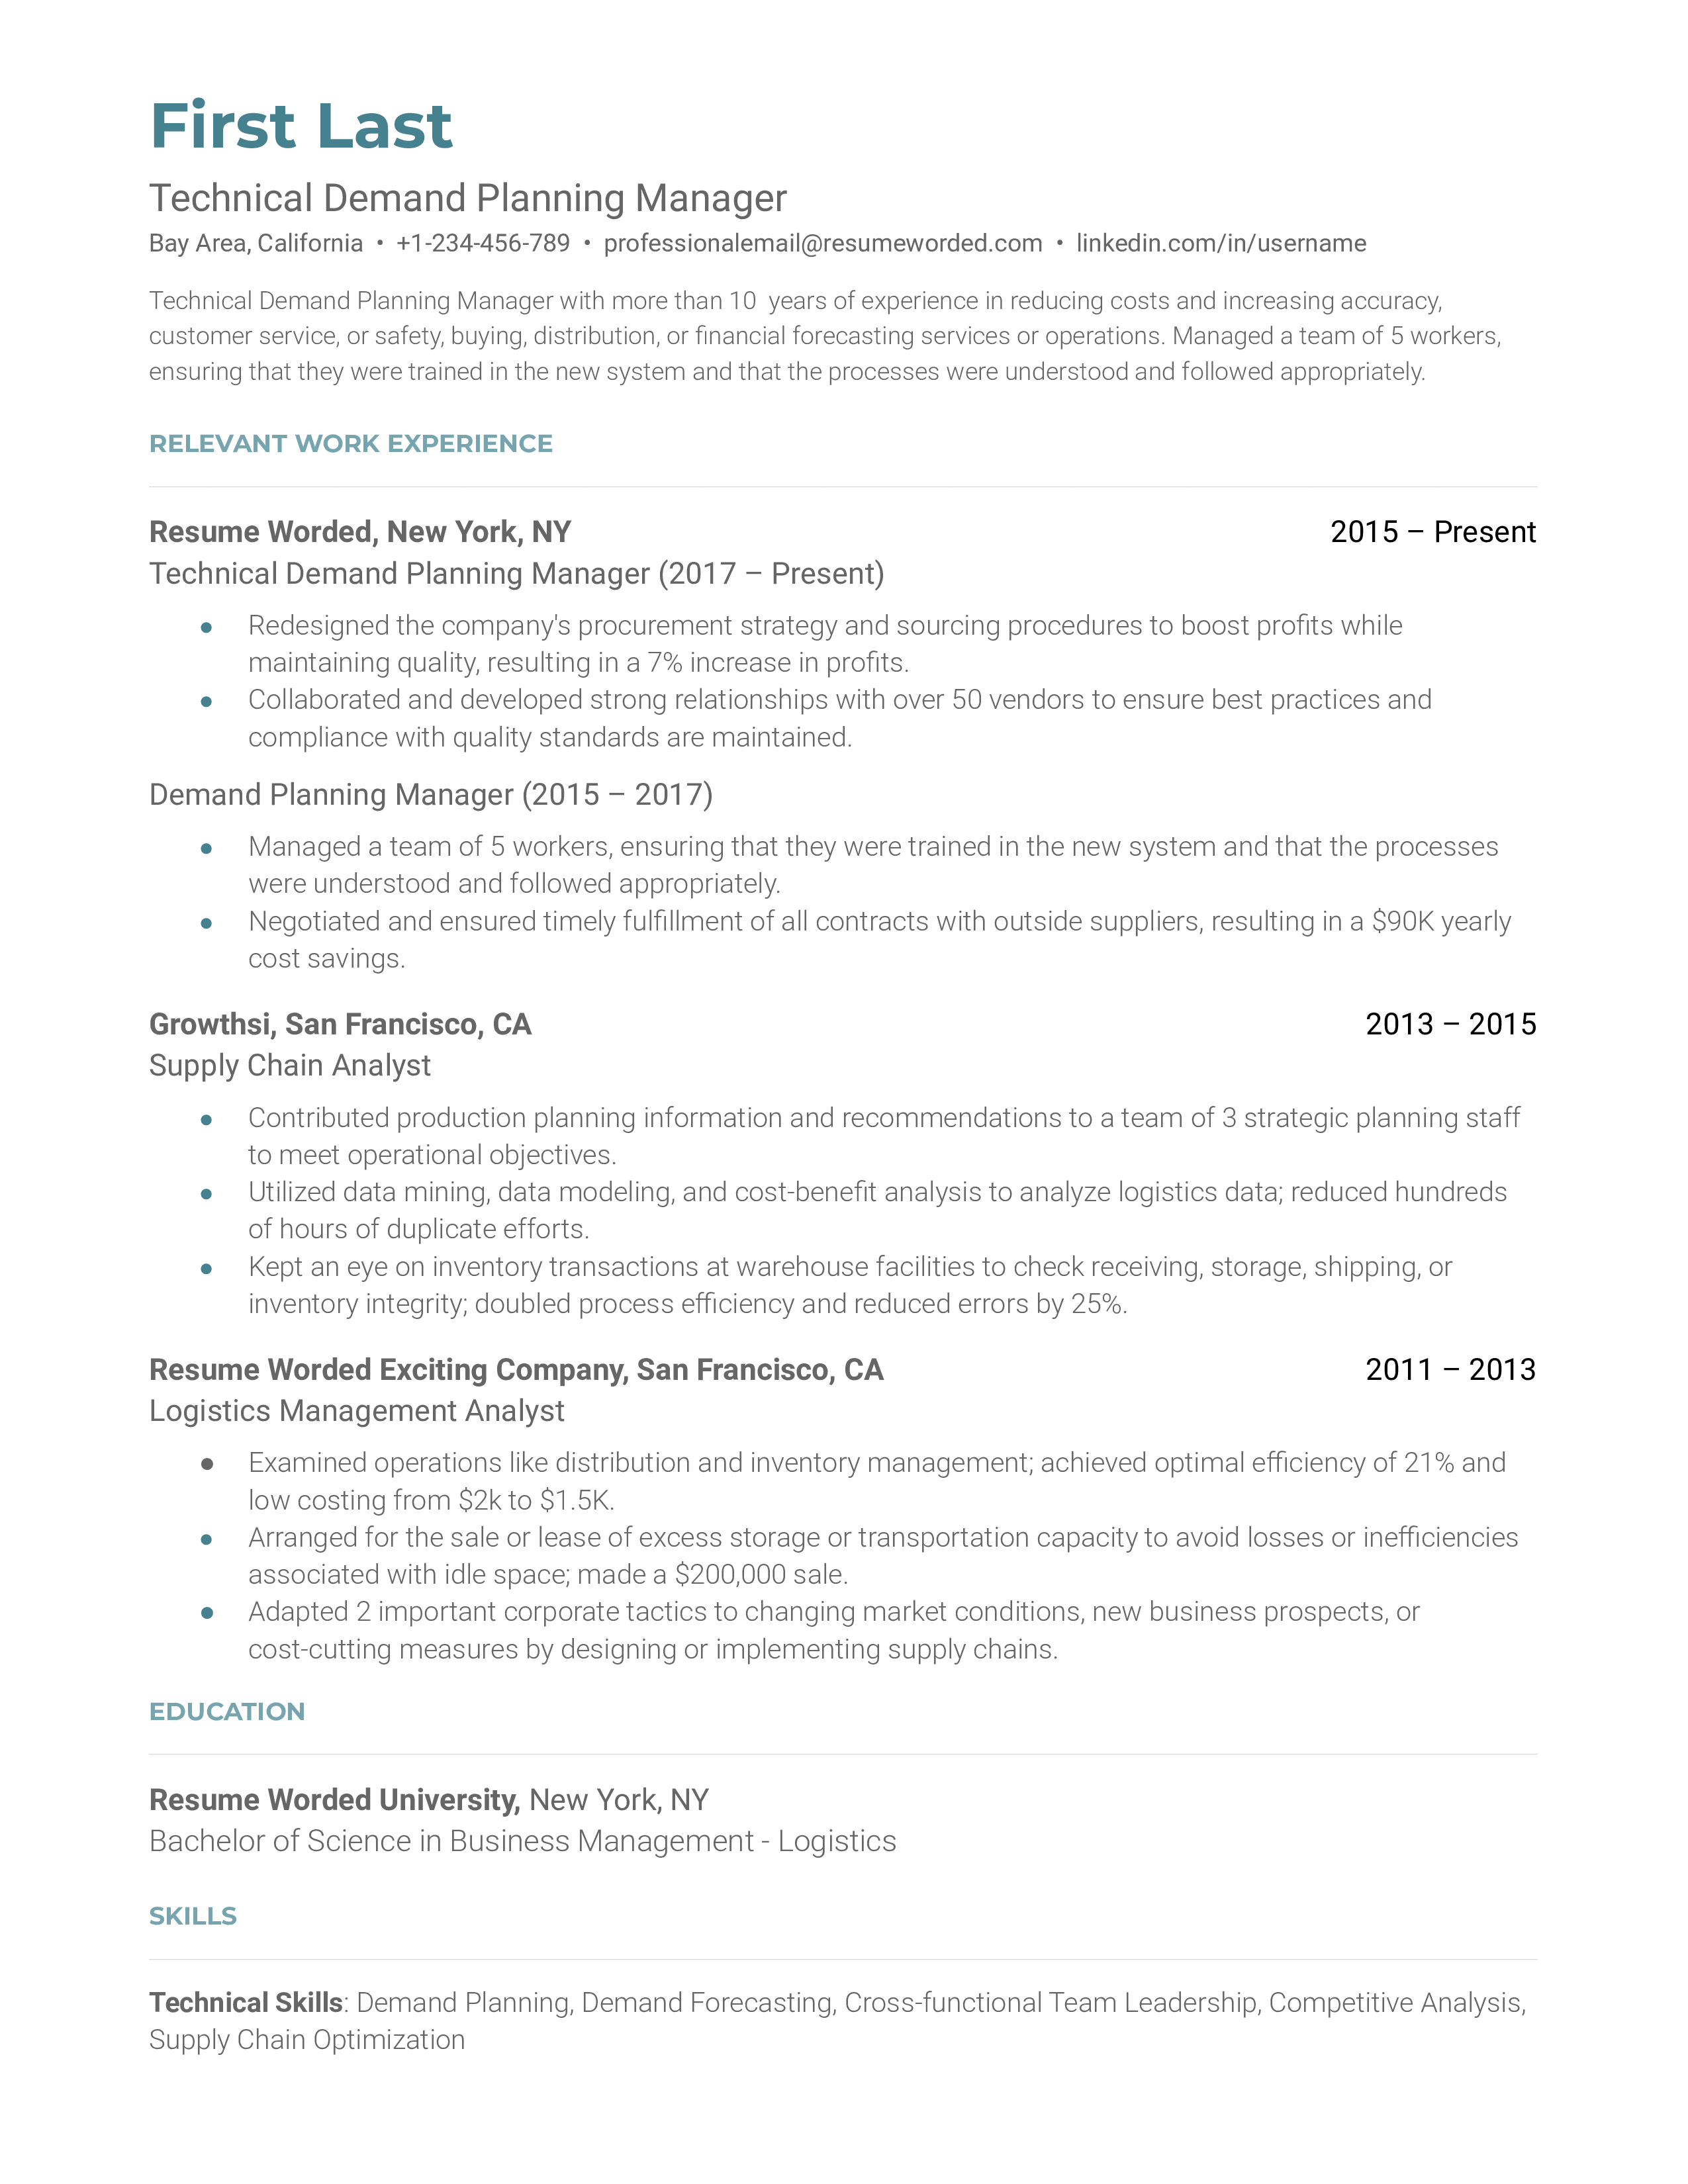 An example of a technical demand planning manager resume for 2022